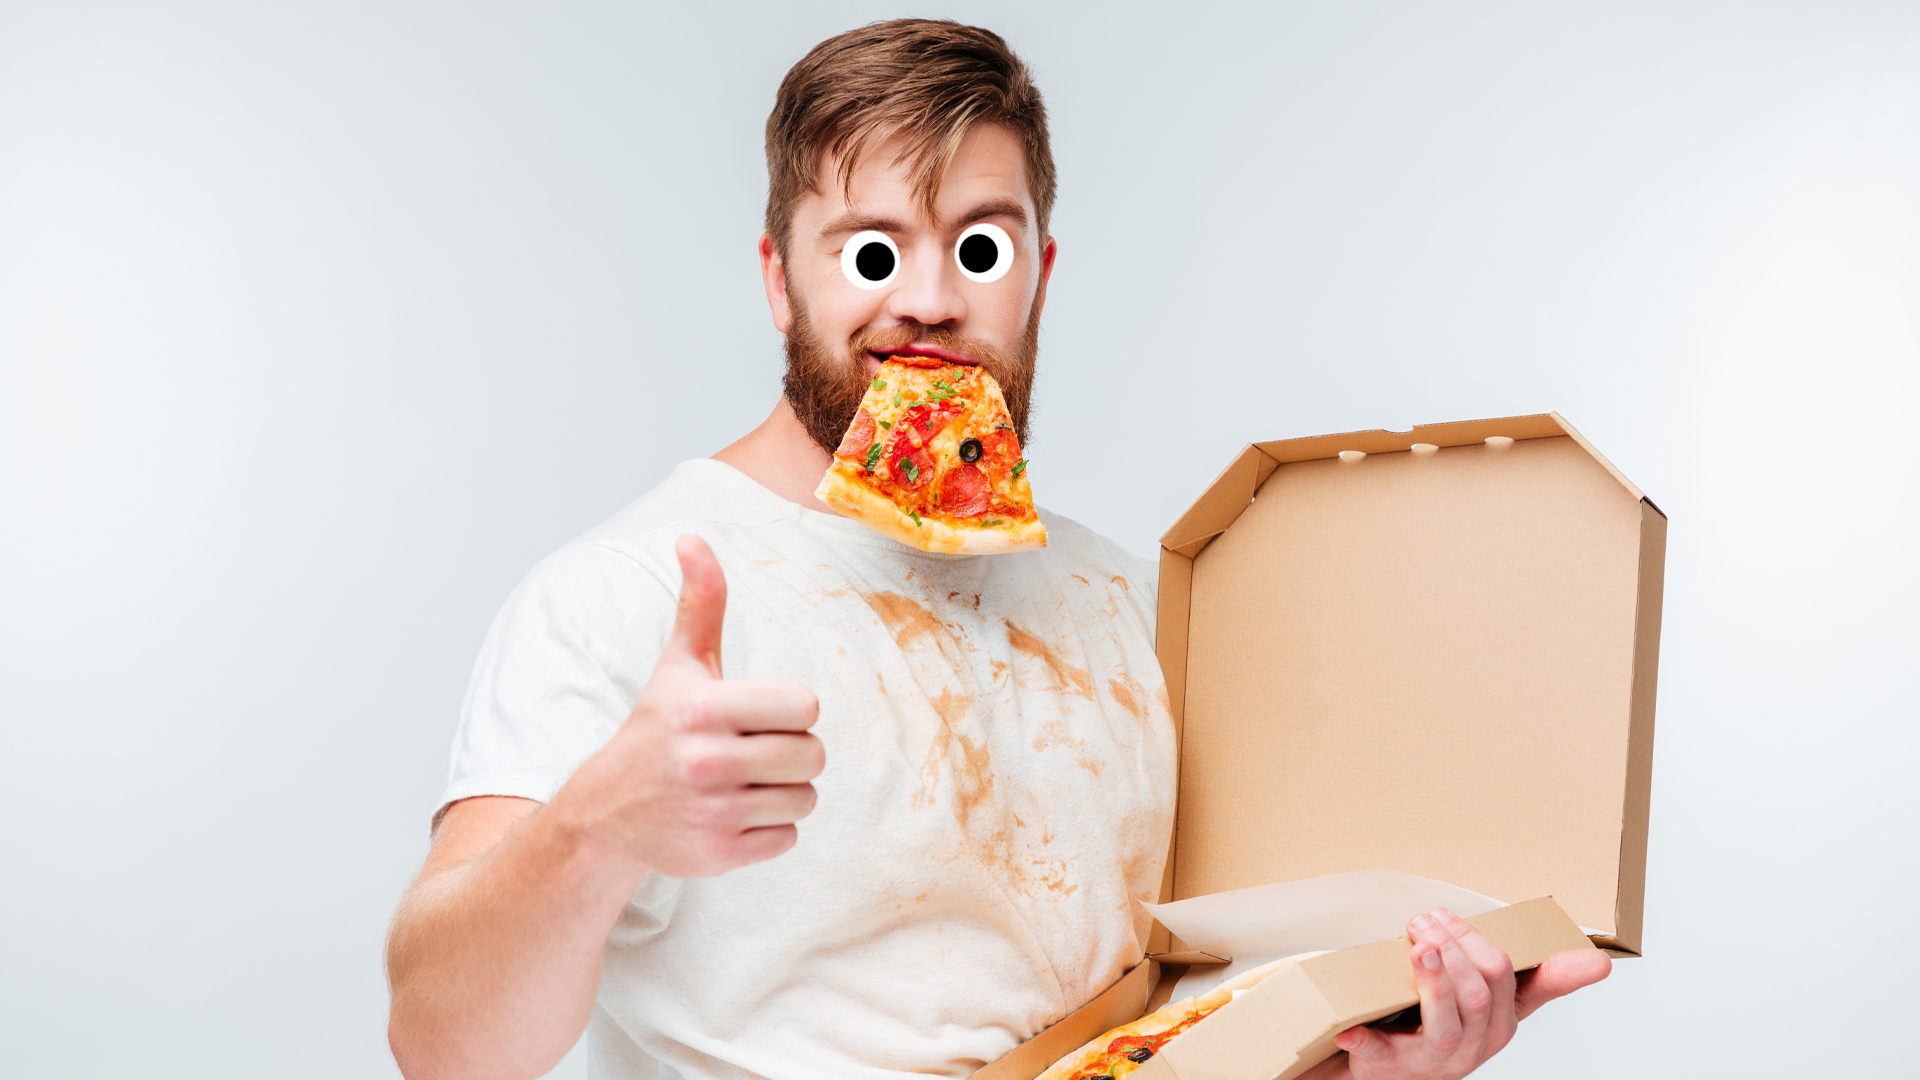 A man eating a greasy pizza